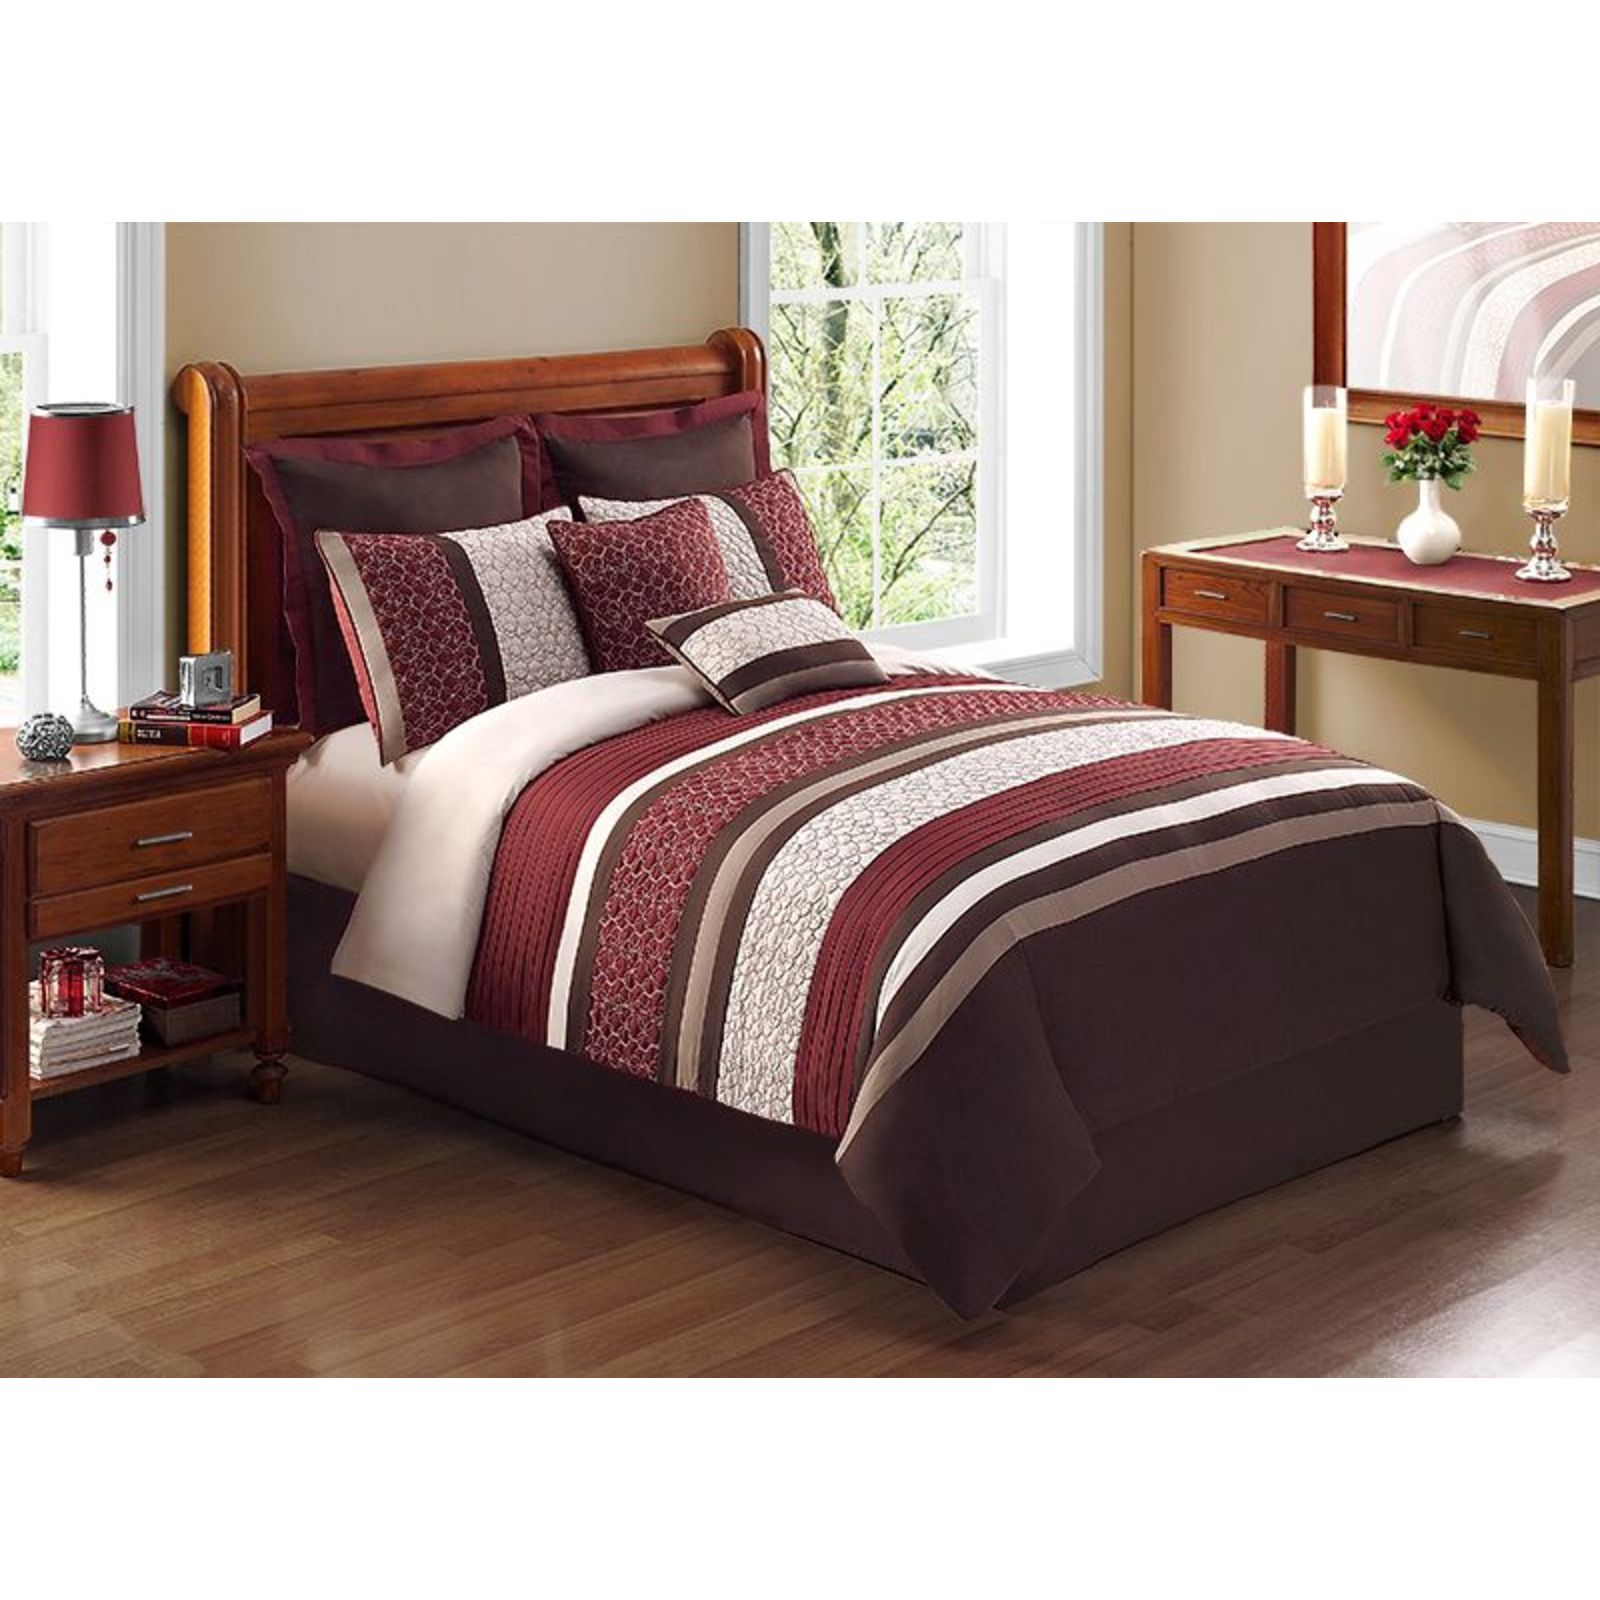 Trenton 8 Piece Comforter Set - Red and Taupe